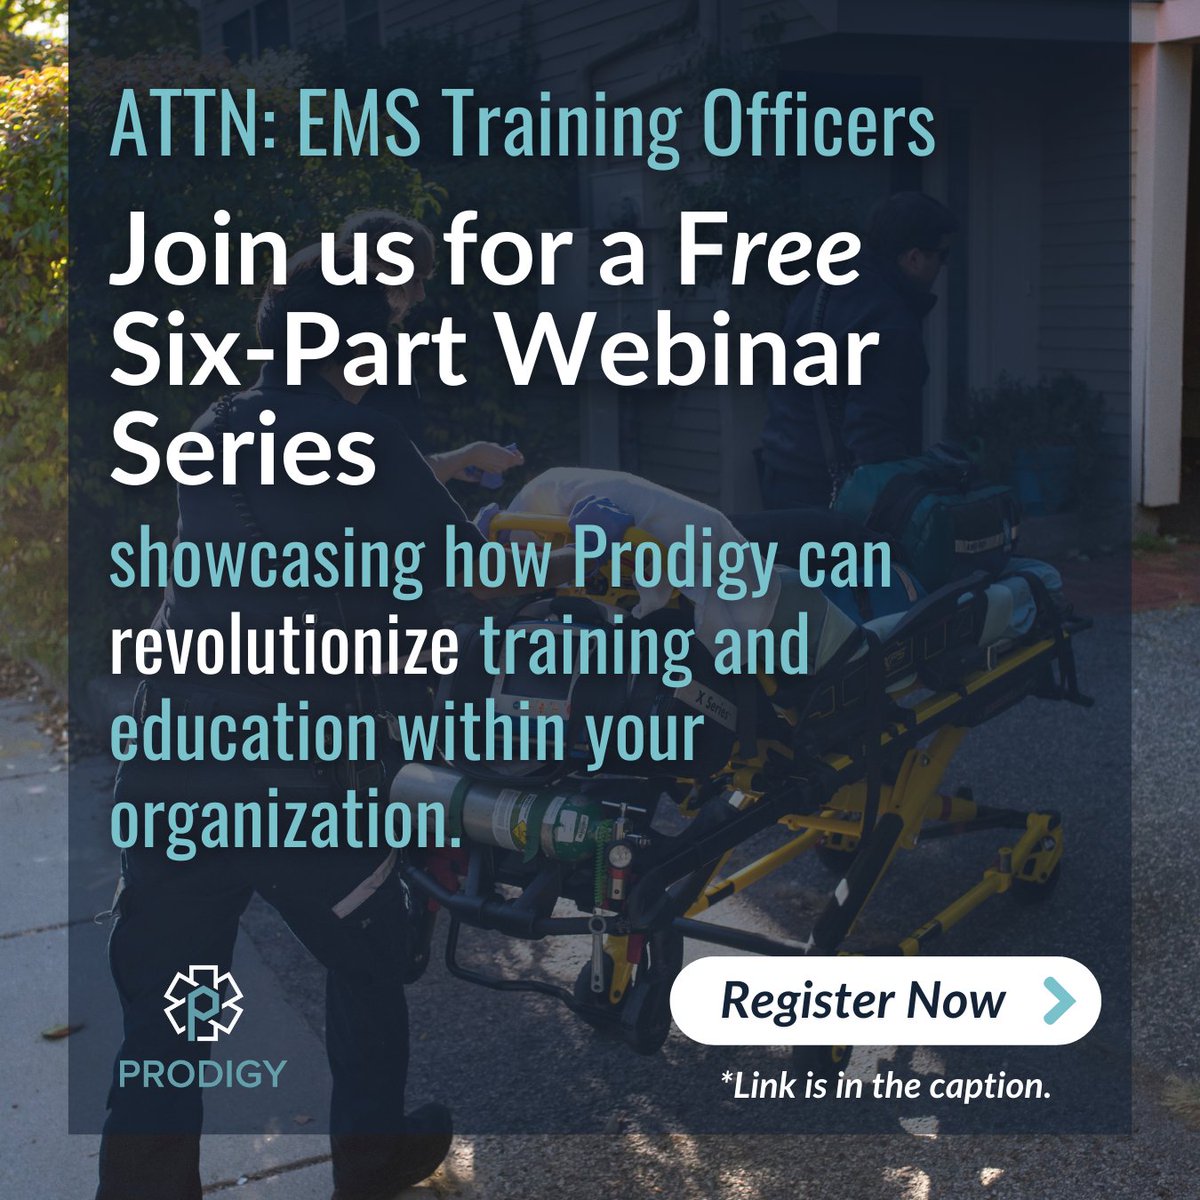 🚨 Exciting update for EMS professionals! Join our FREE Prodigy EMS Training Officer Workshop starting May 2nd. Dive into a 6-part webinar series designed to supercharge your EMS training skills!

🔗 Sign up now! #ProdigyEMS #WebinarSeries

bit.ly/3Wnk0AH